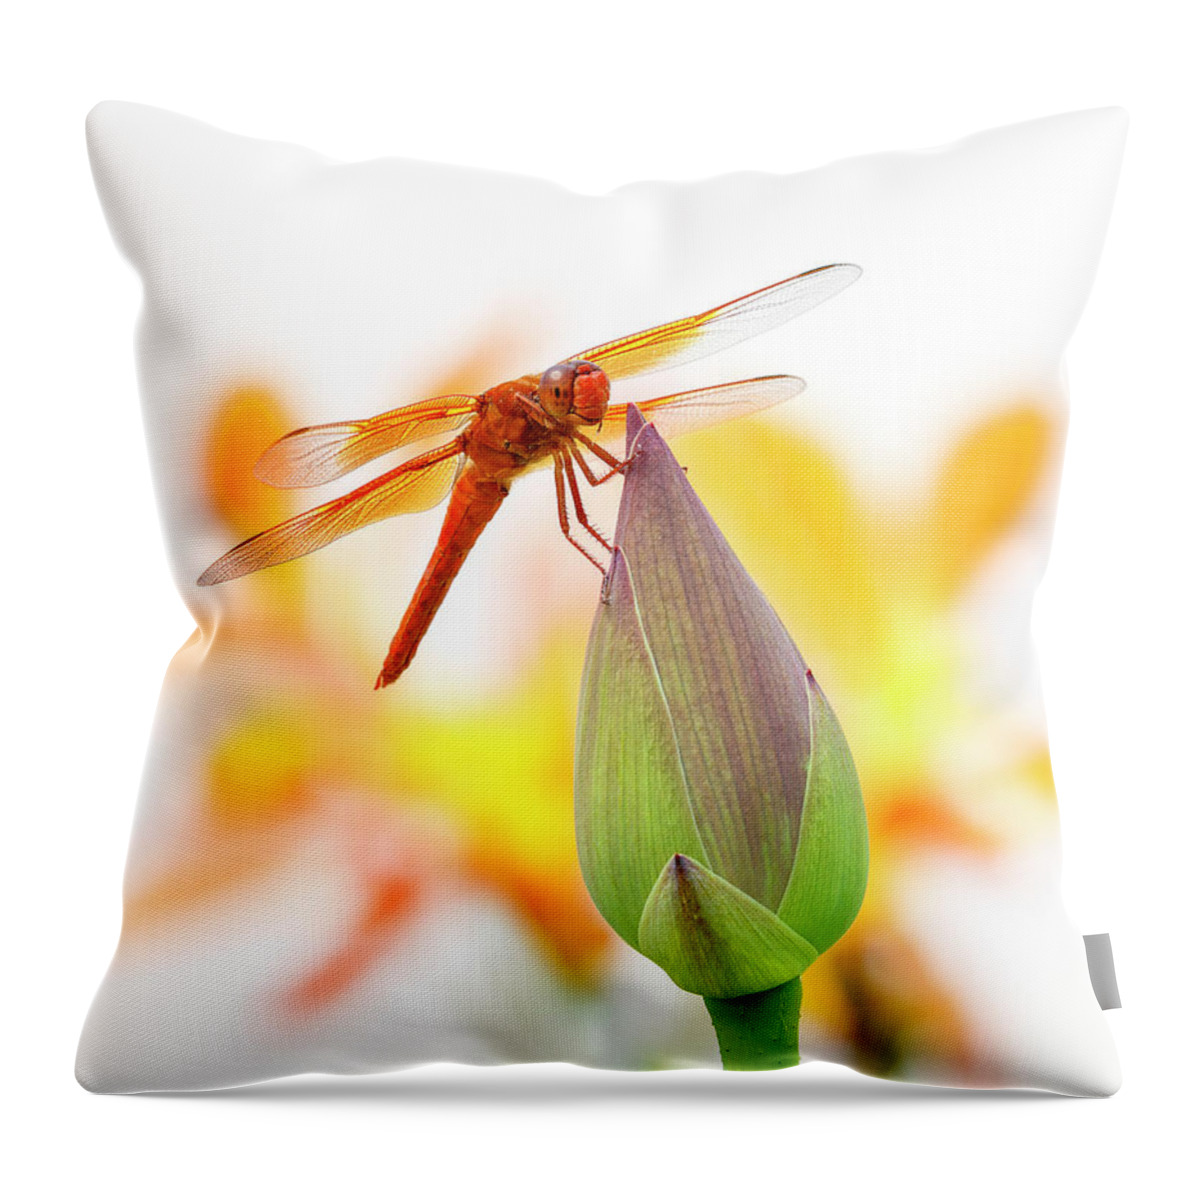 Dragonfly Perch Throw Pillow featuring the photograph Dragonfly Perch by Wes and Dotty Weber